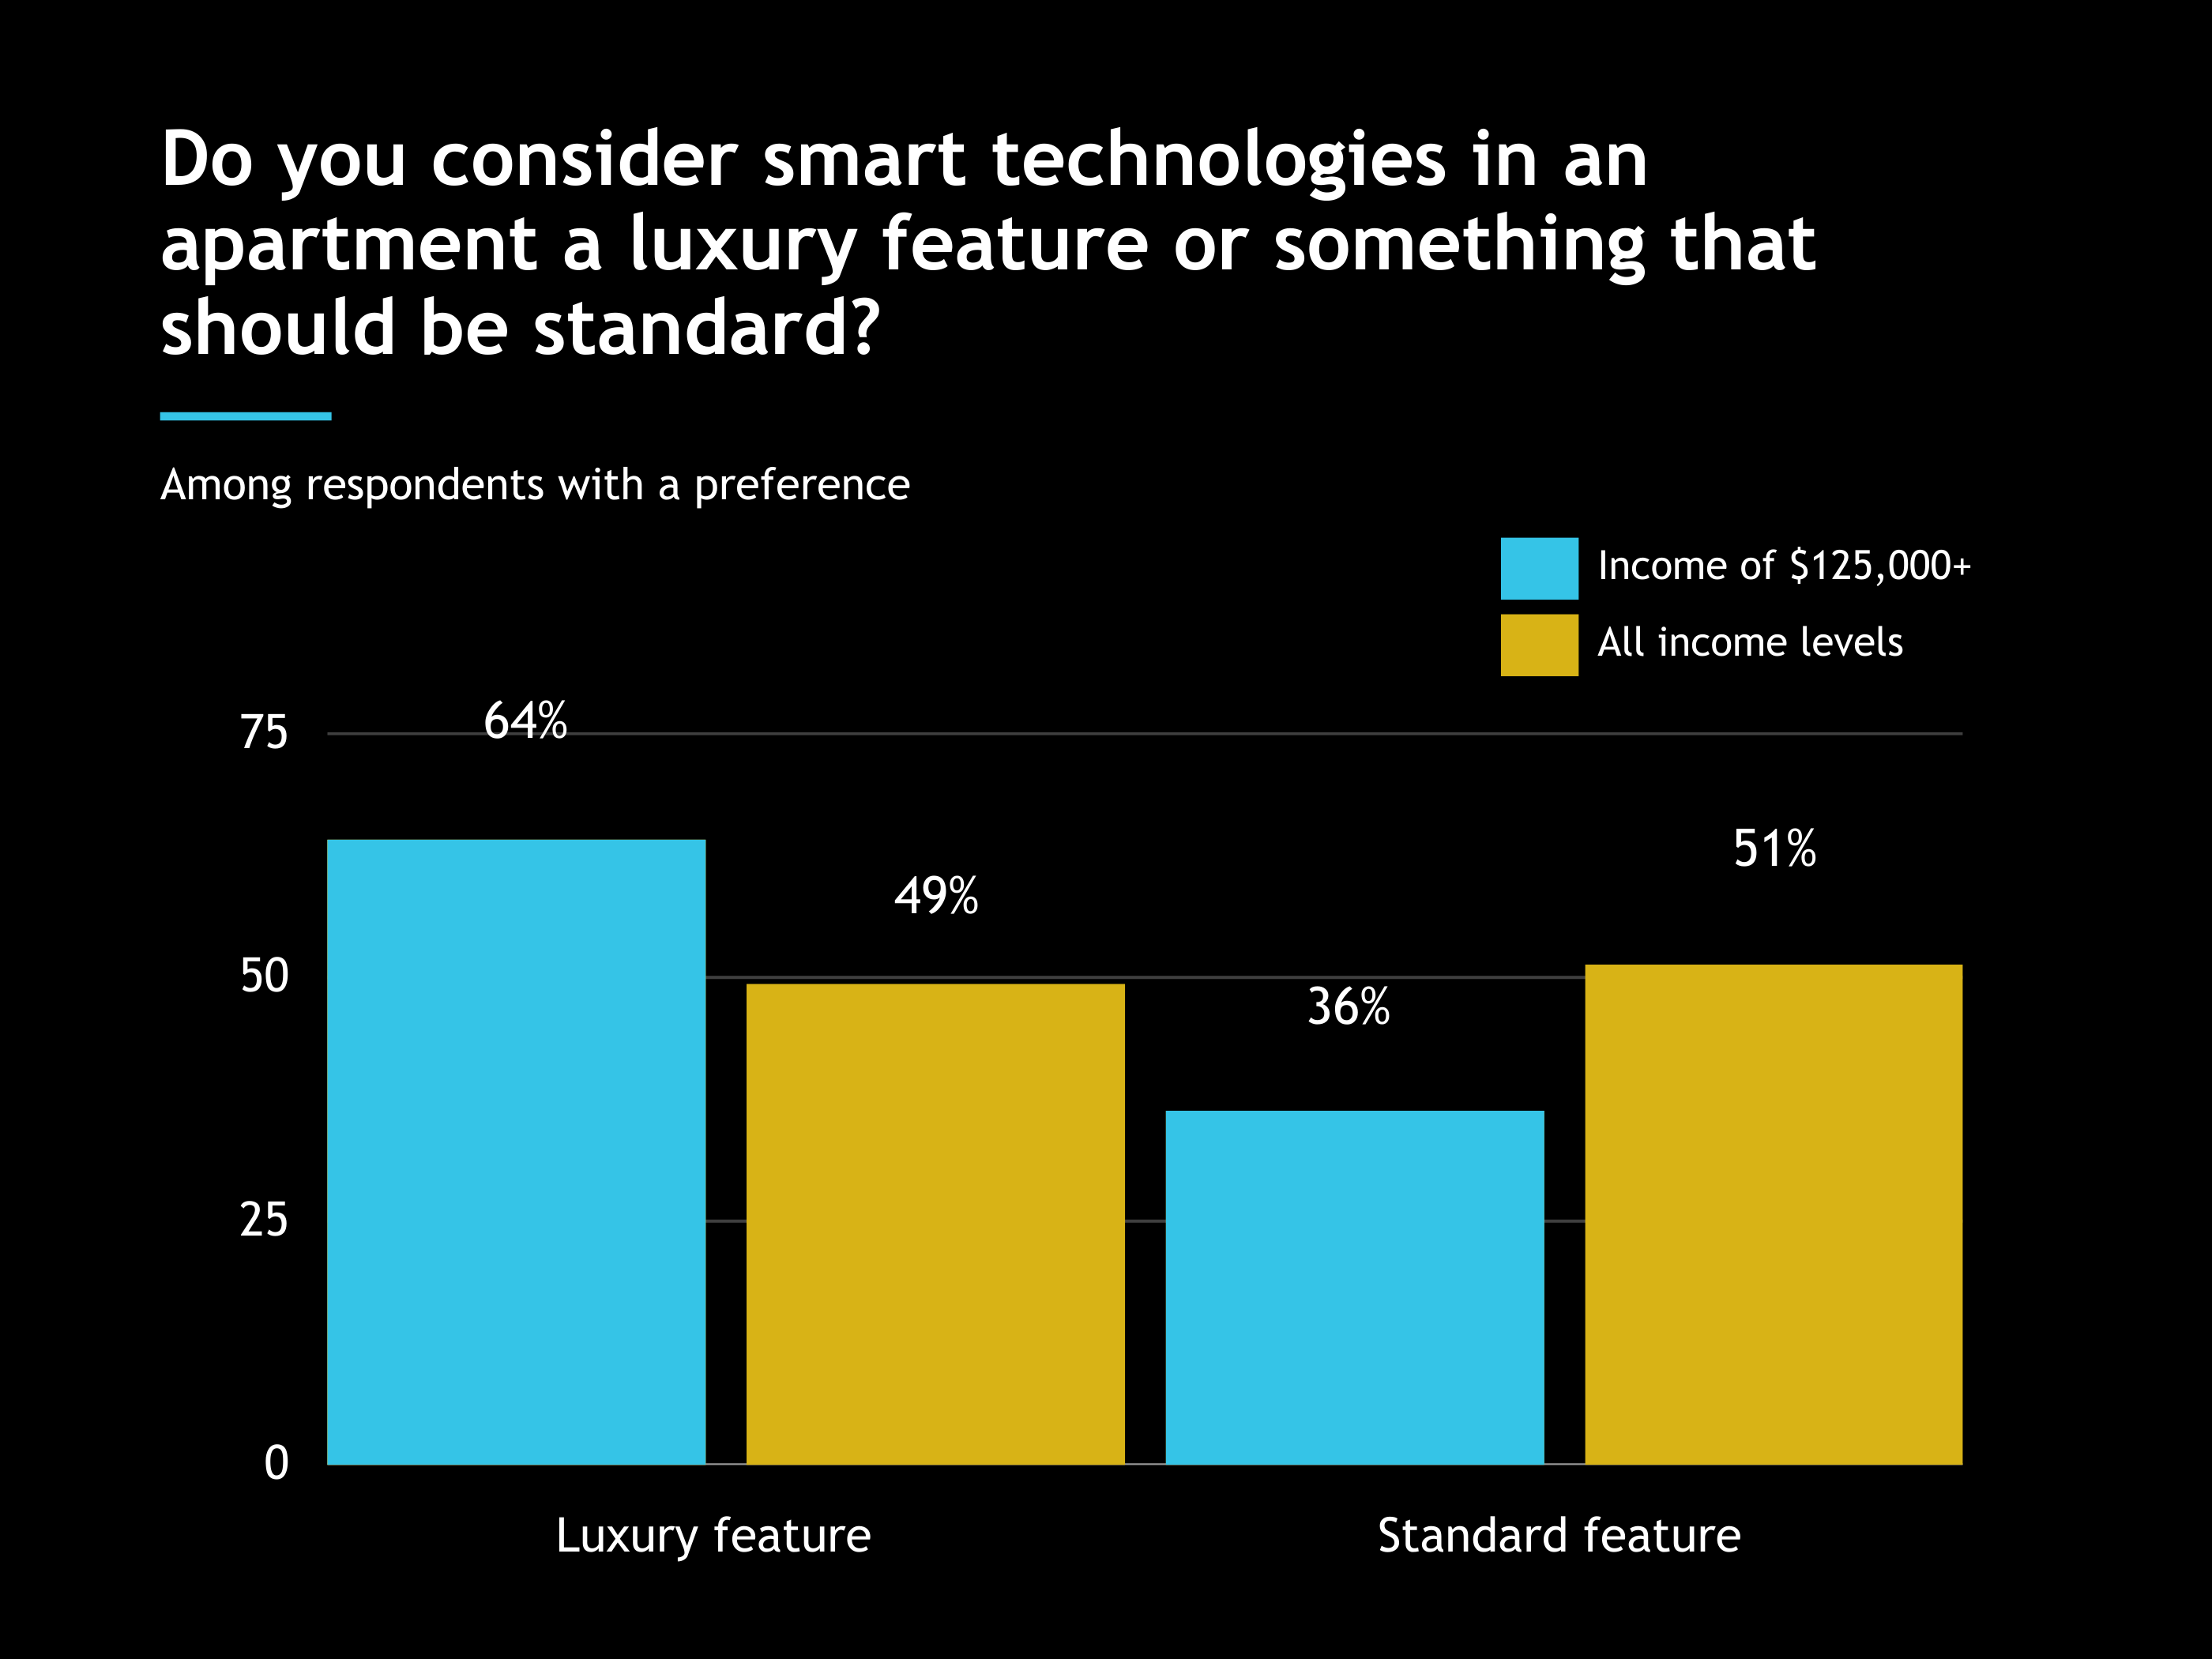 Do you consider smart technologies in an apartment a luxury feature or something that should be standard?